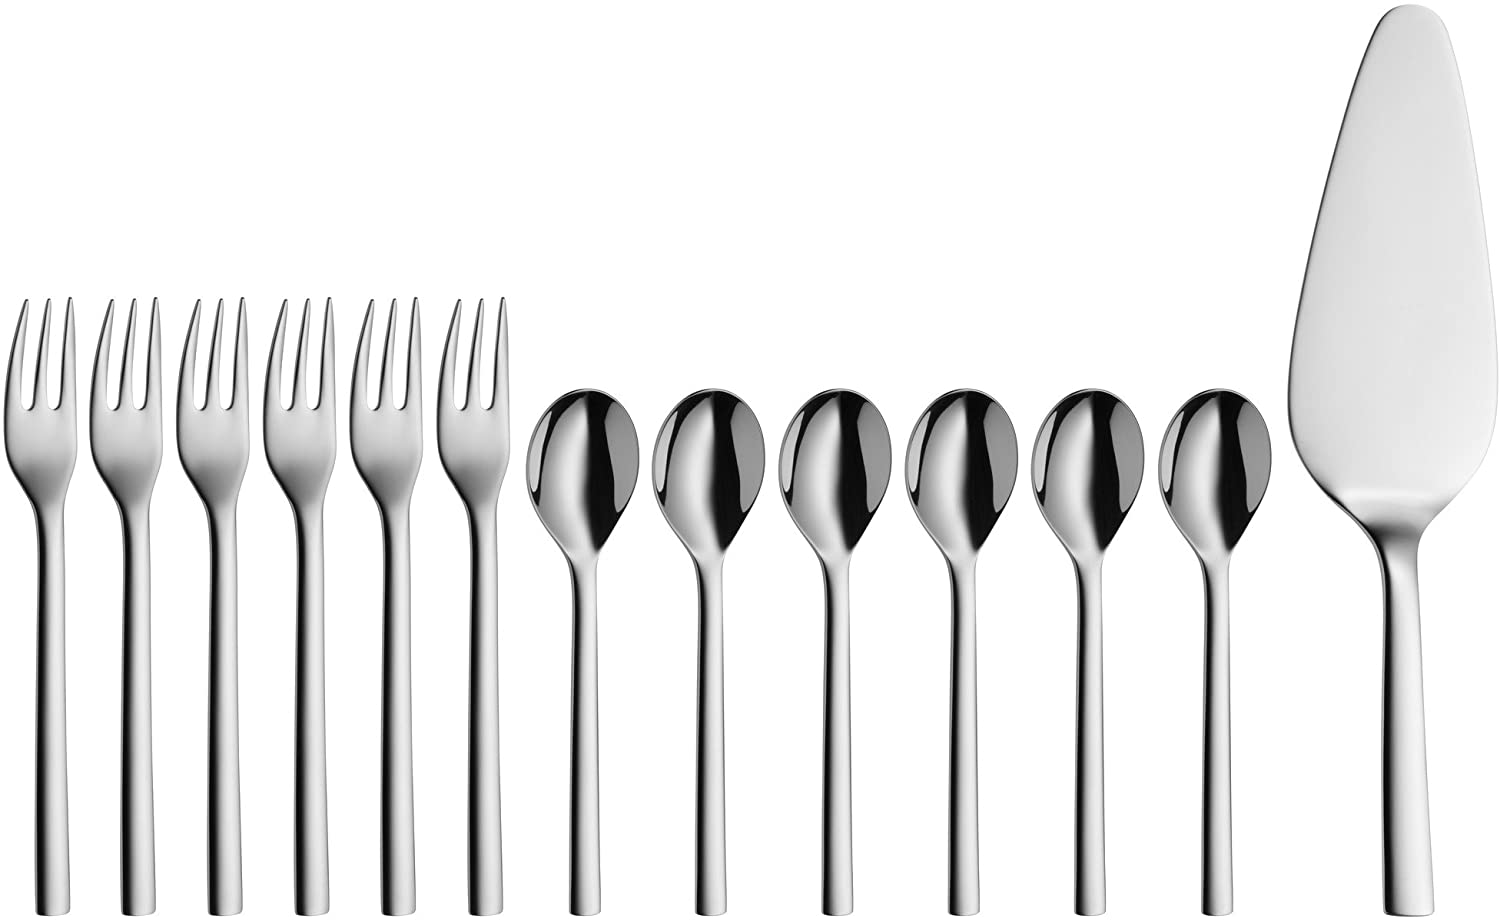 WMF Nuova Fruit / Cake Cutlery 13 Pieces for 6 People, Coffee Spoon, Cake Fork, Cake Server, Polished Cromargan Stainless Steel, Dishwasher Safe